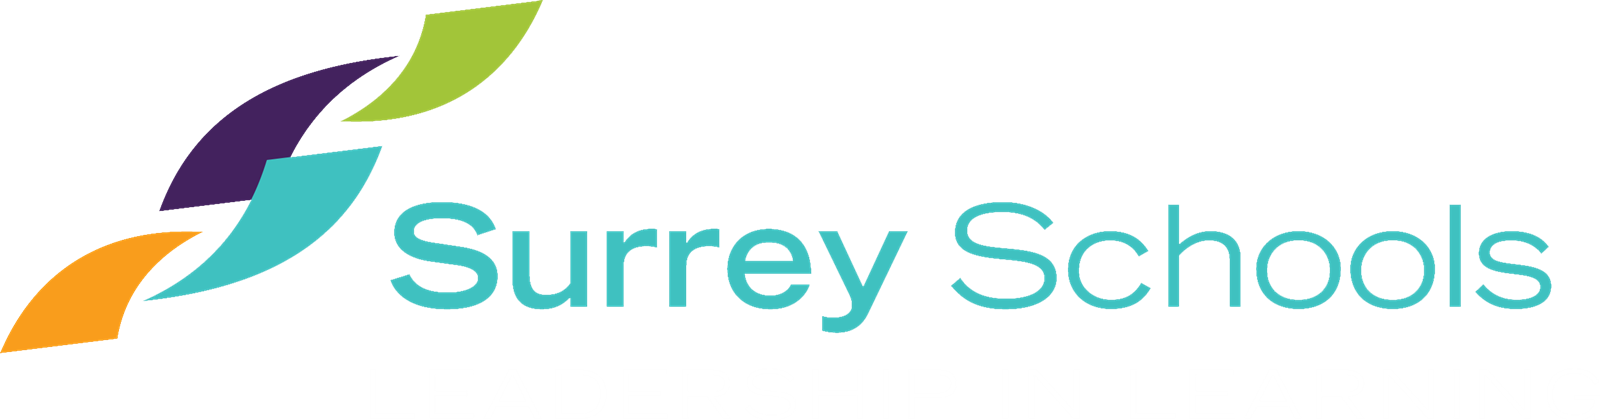 surrey%20schools%20logo%20colour%20with%20white%20lettering.png